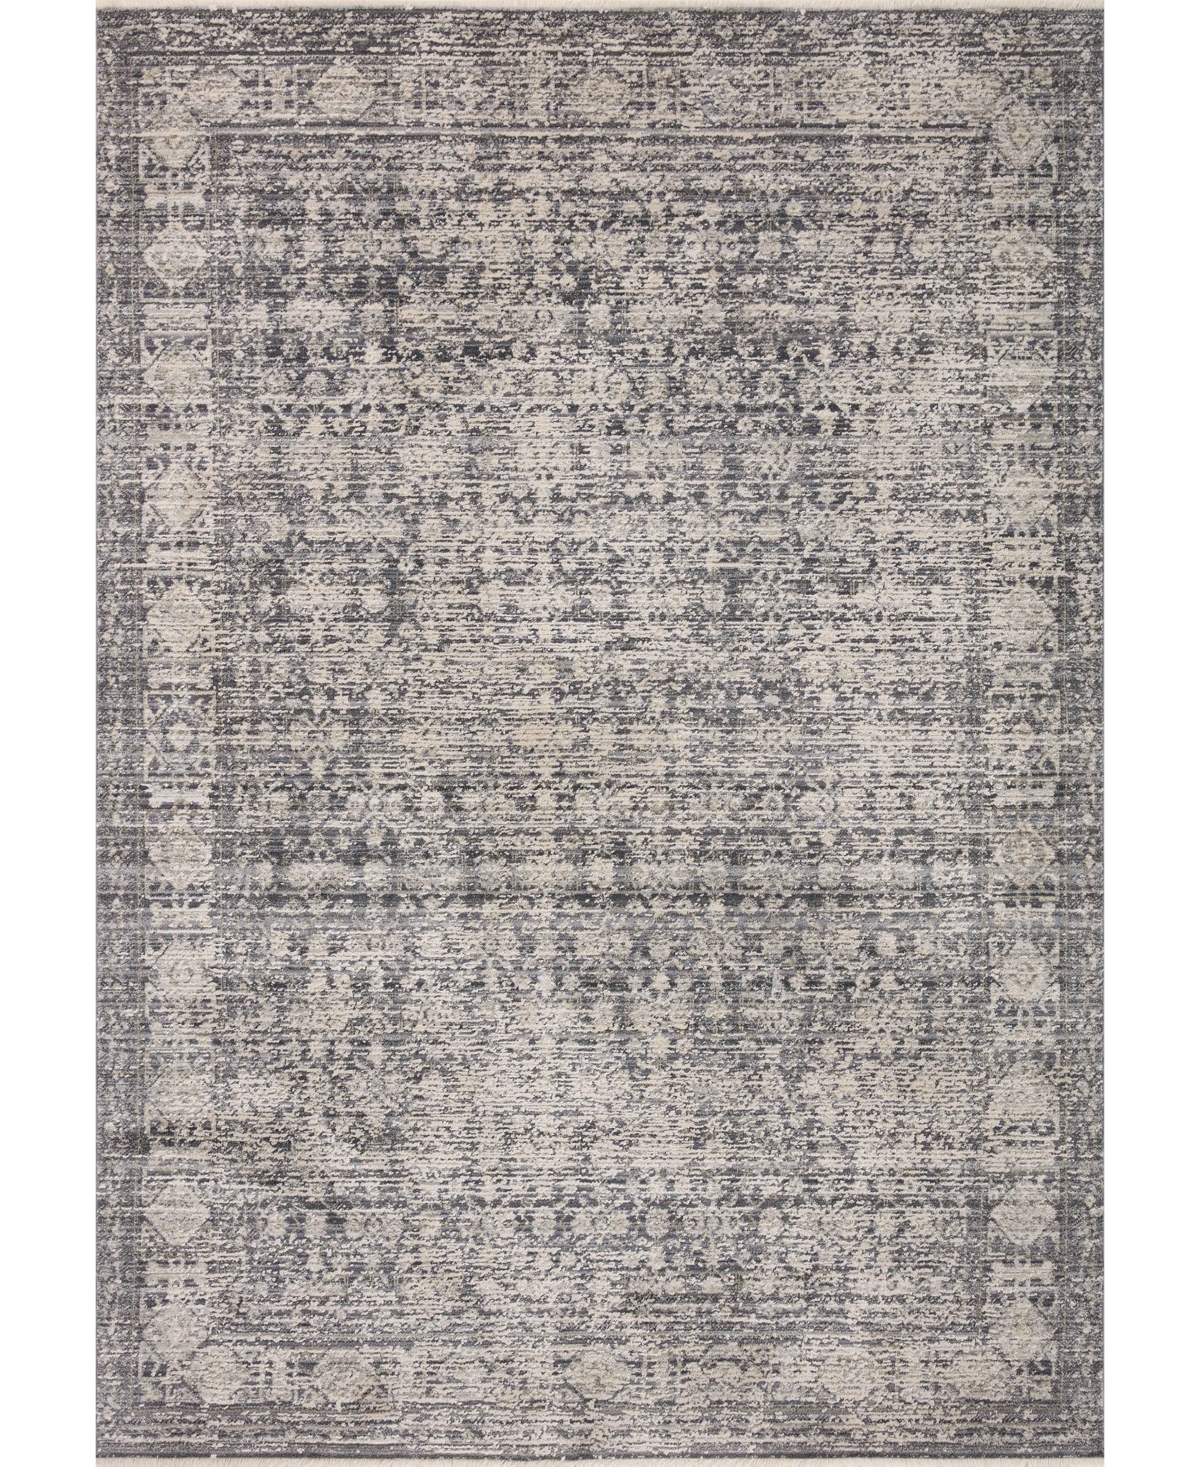 Amber Lewis X Loloi Alie Ale-03 2'3" X 3'10" Area Rug In Charcoal